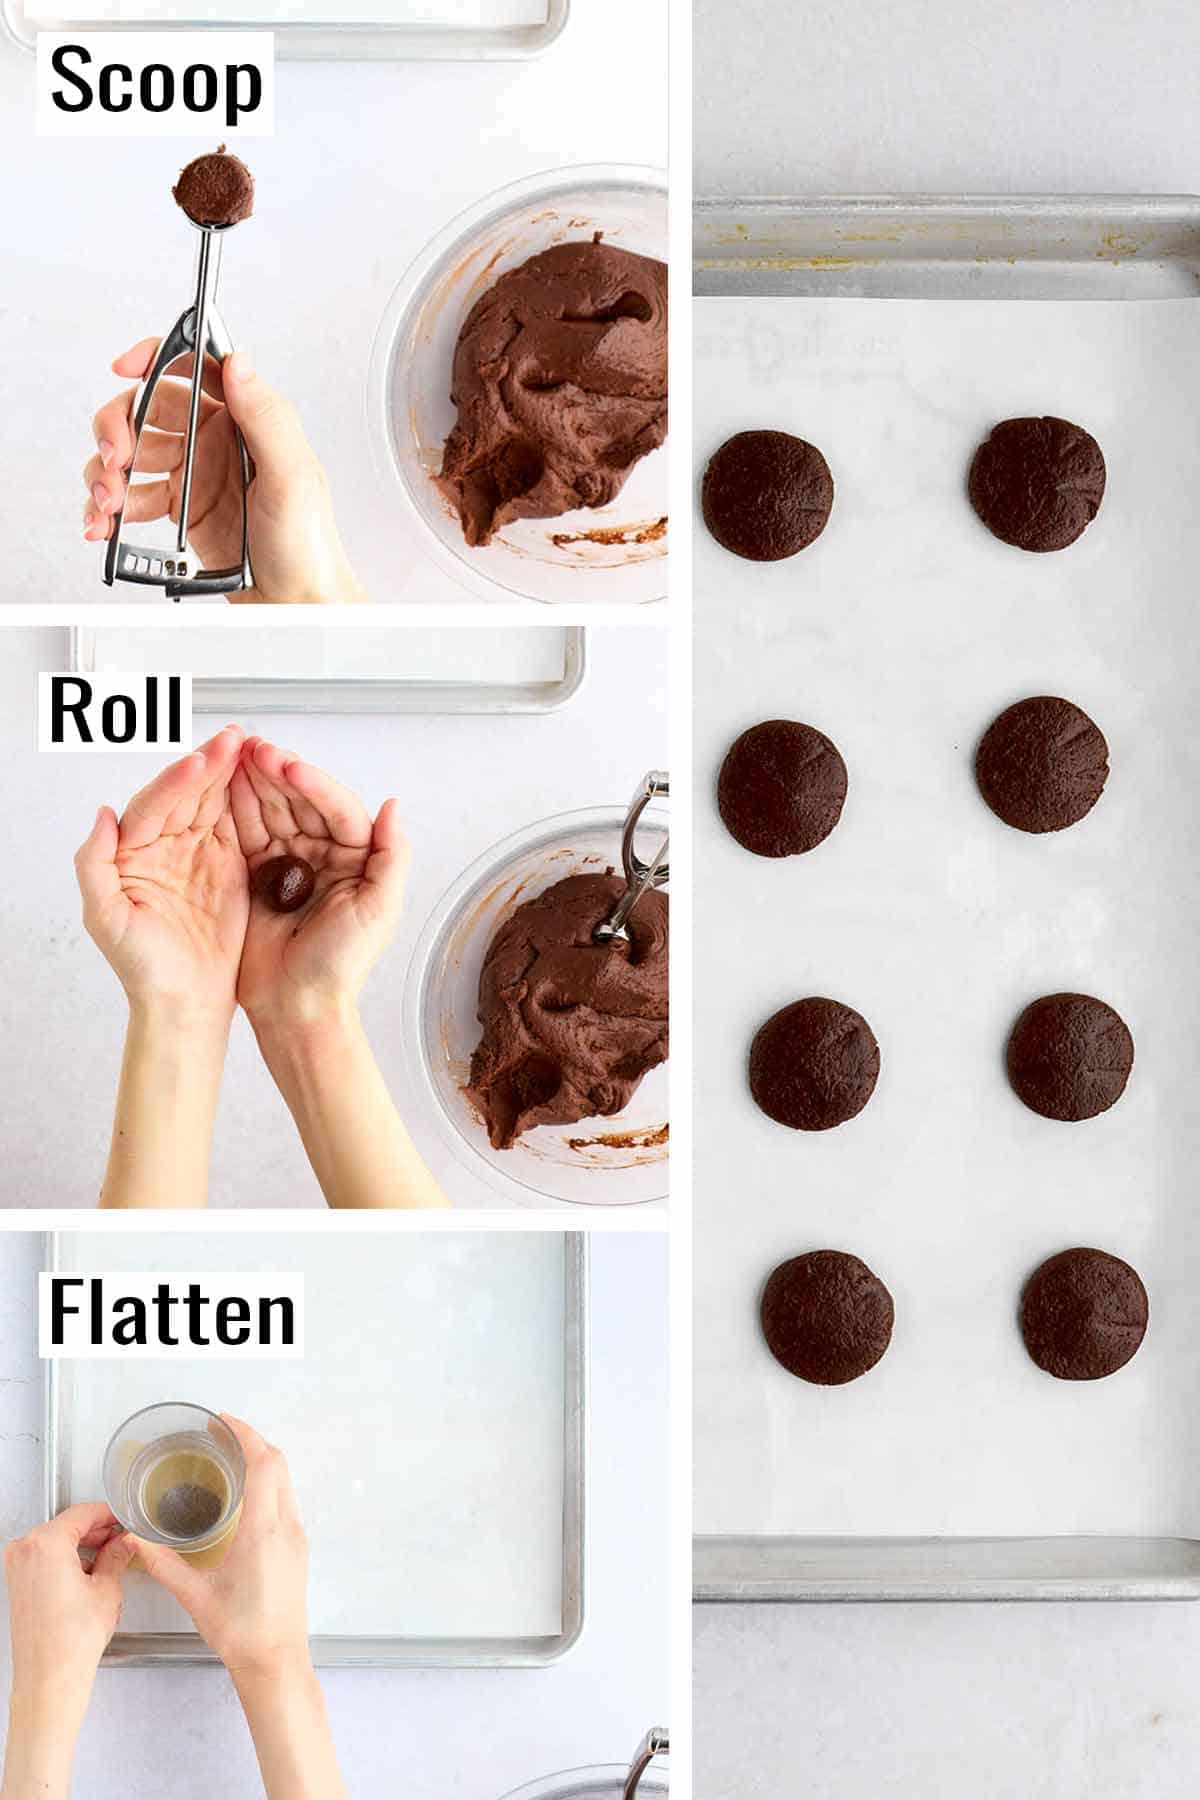 Showing the steps of scooping, rolling, and flattening the Oreo cookie dough before being baked.